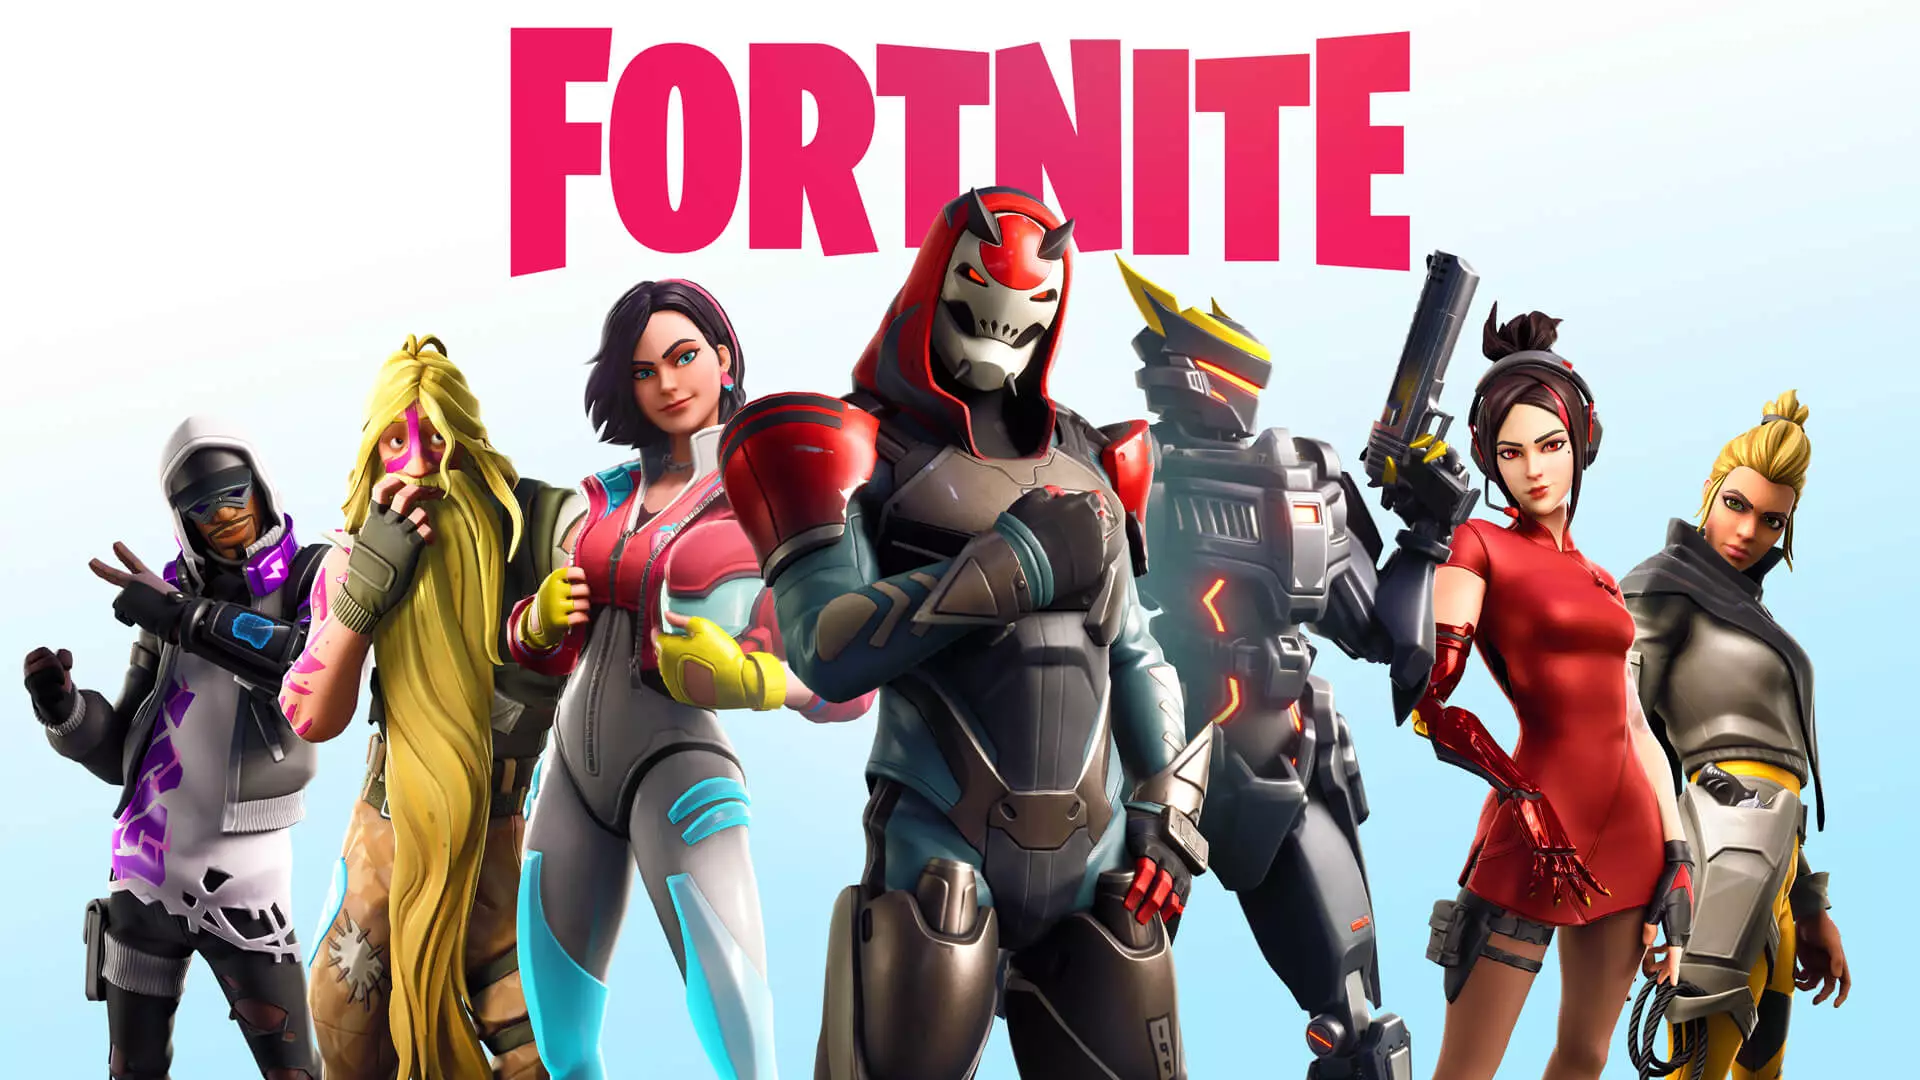 Fortnite offers a whole variety of in-game purchases.